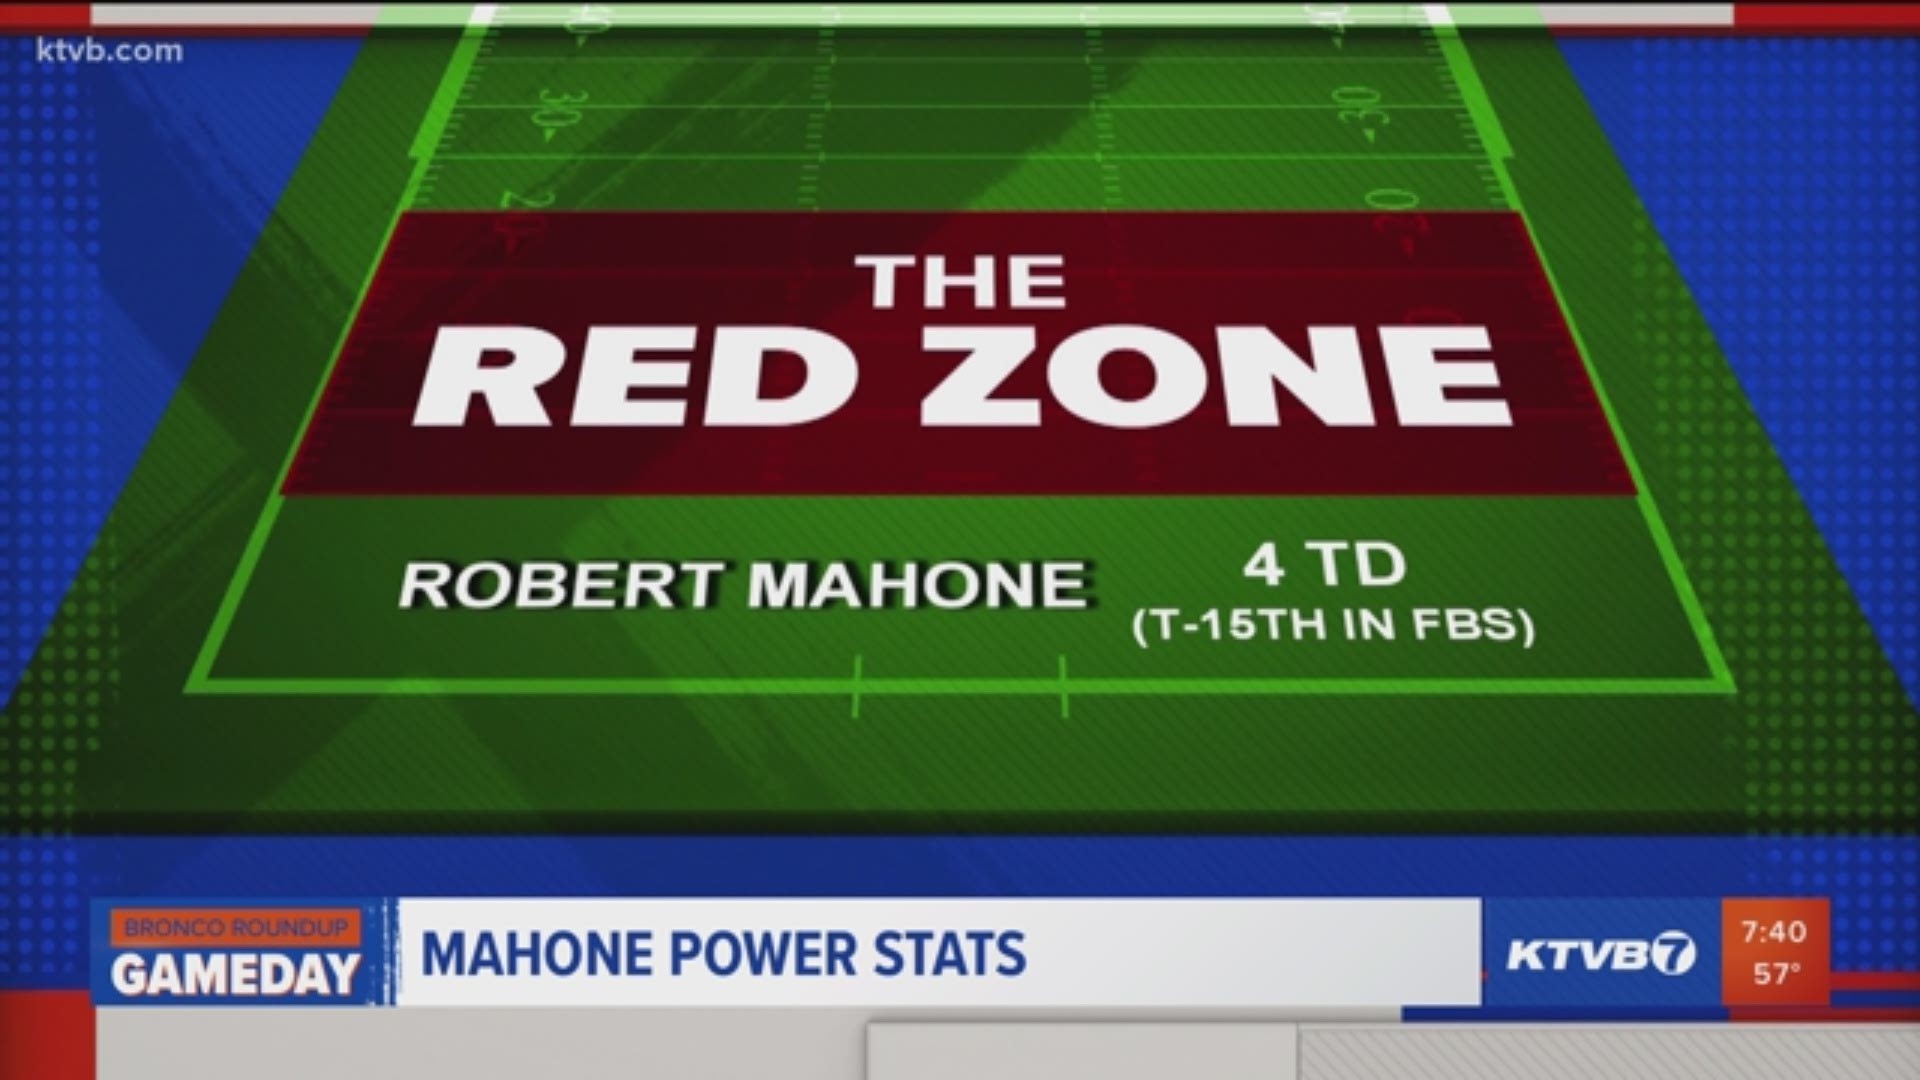 After a slow September, Robert Mahone is settling into the starting running back role. Plus, Boise State's NY6 path is opening up as No. 24 SMU is losing their game.